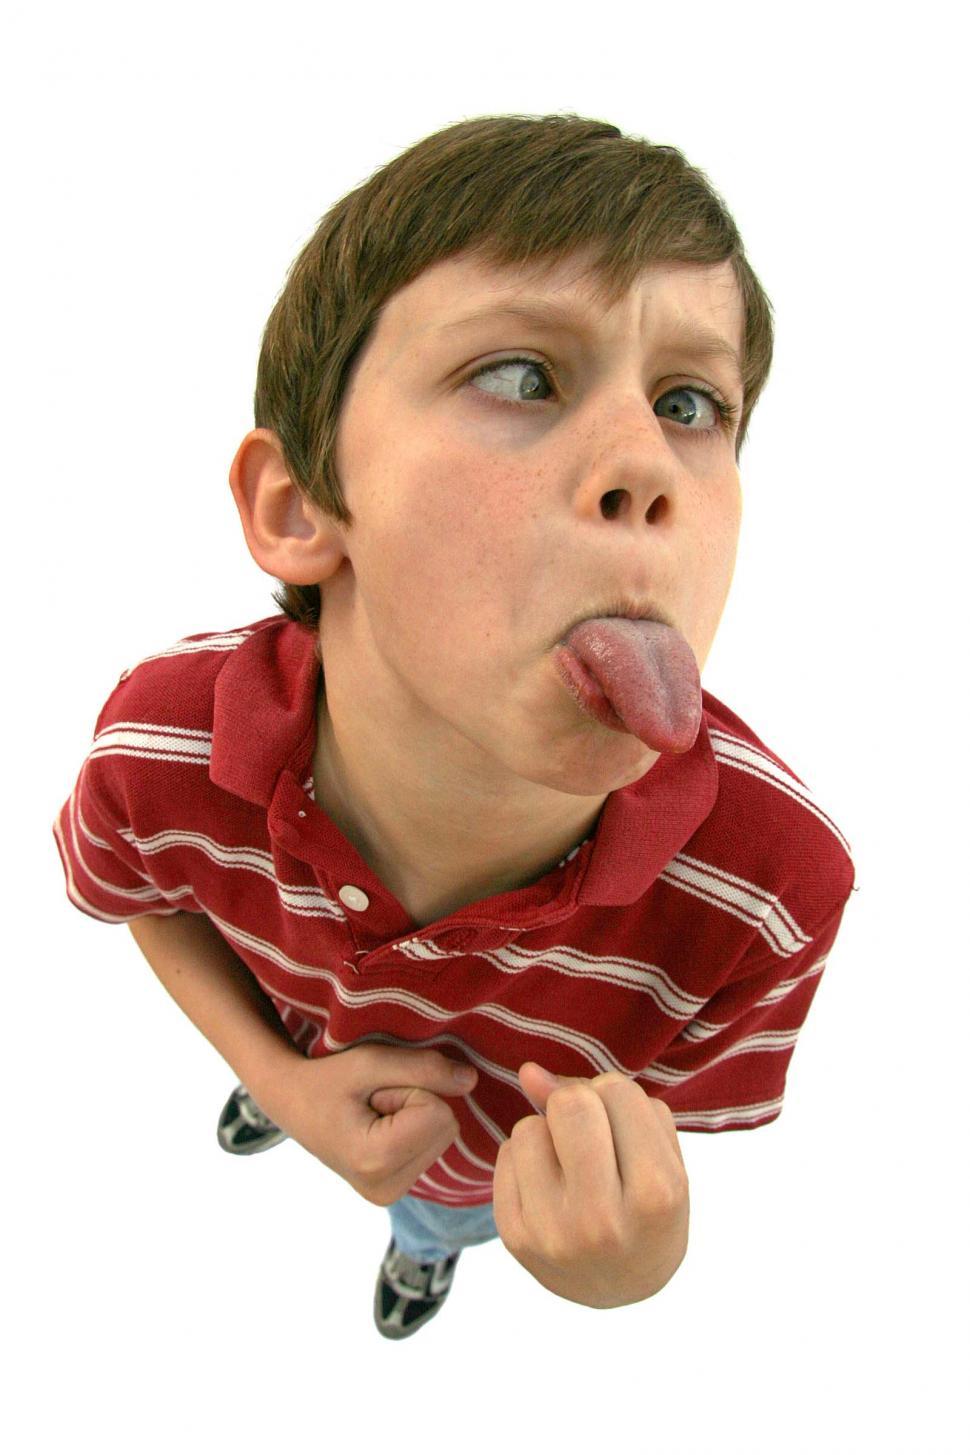 Free Image of Silly face kid 